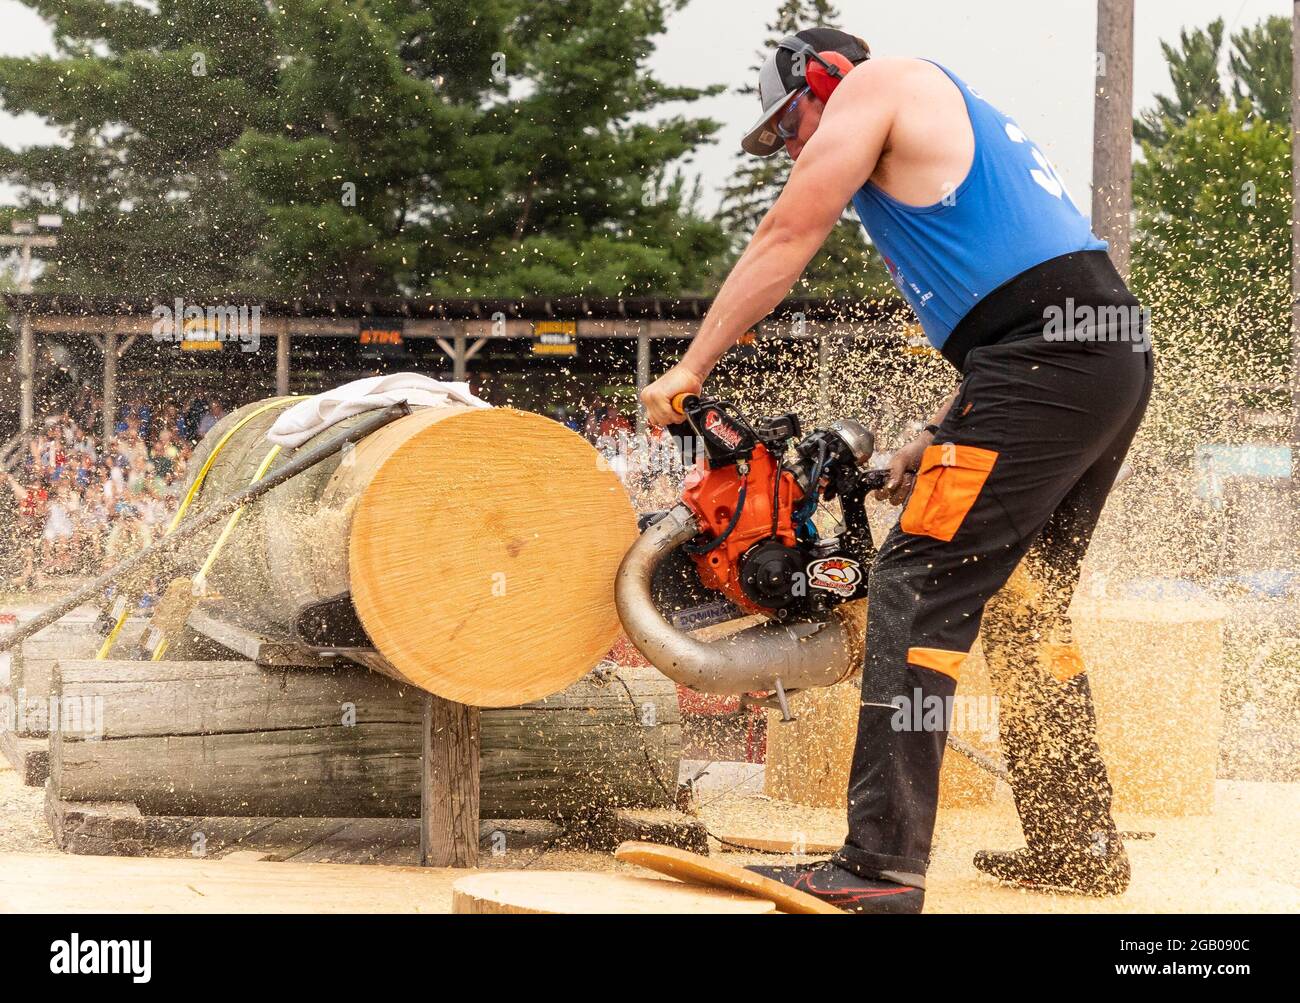 Hayward, USA. 1st Aug, 2021. A man uses a hot saw to cut wood during the 61st Lumberjack World Championships in Hayward, Wisconsin, the United States, on July 31, 2021. The championships held here showcased lumberjacks and lumberjills competing in sawing, chopping, speed climbing, log rolling, and boom-running. Credit: Joel Lerner/Xinhua/Alamy Live News Stock Photo